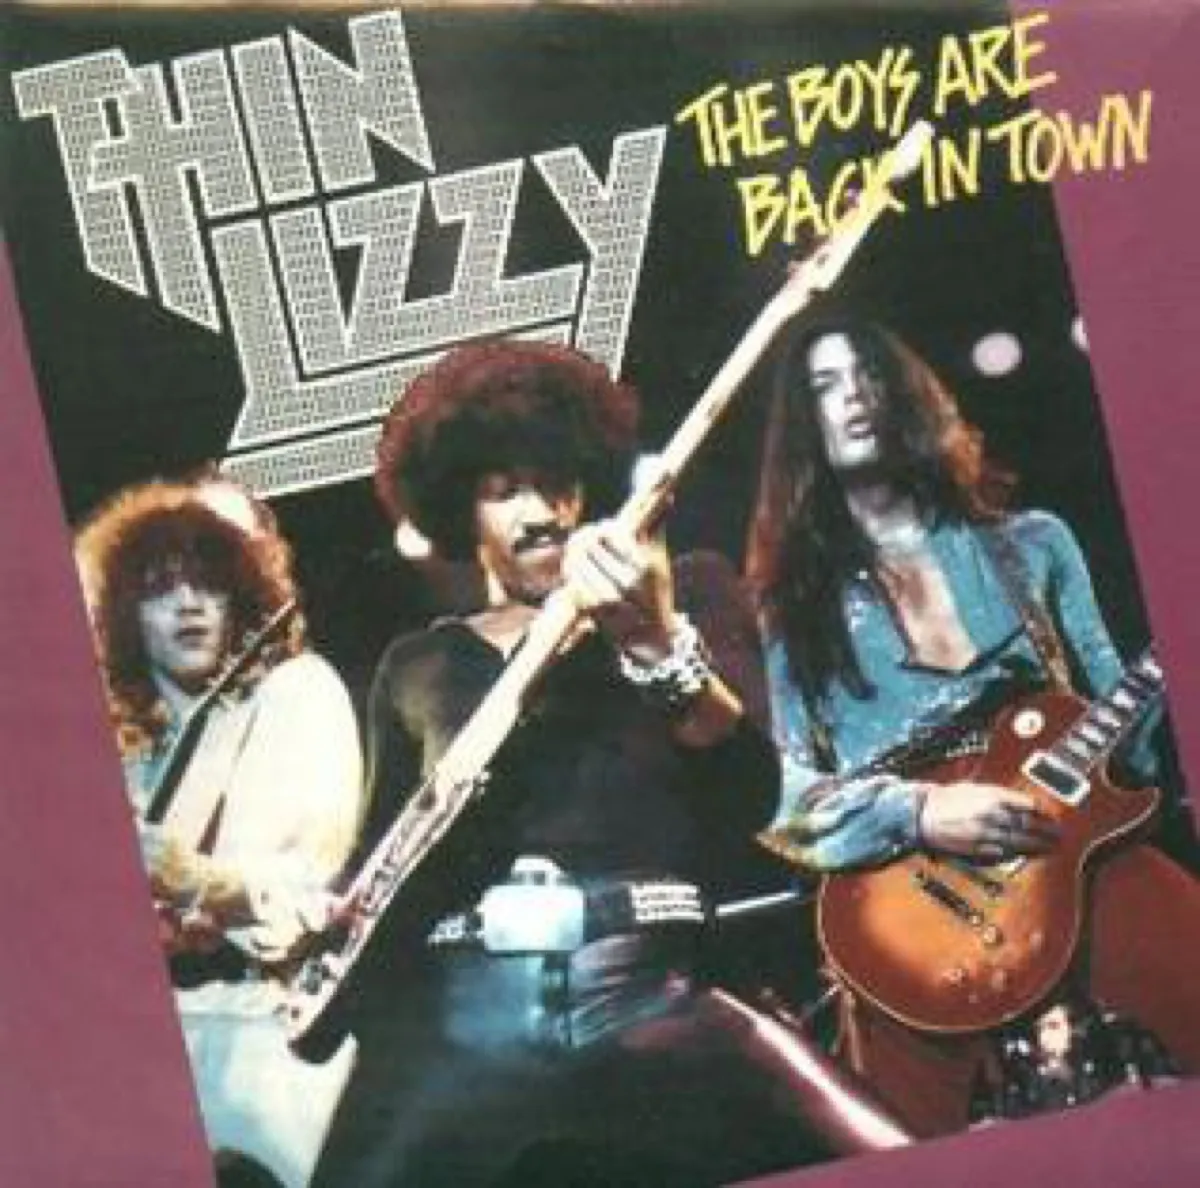 Boys Are Back in Town, Thin Lizzy one hit wonder of 70s